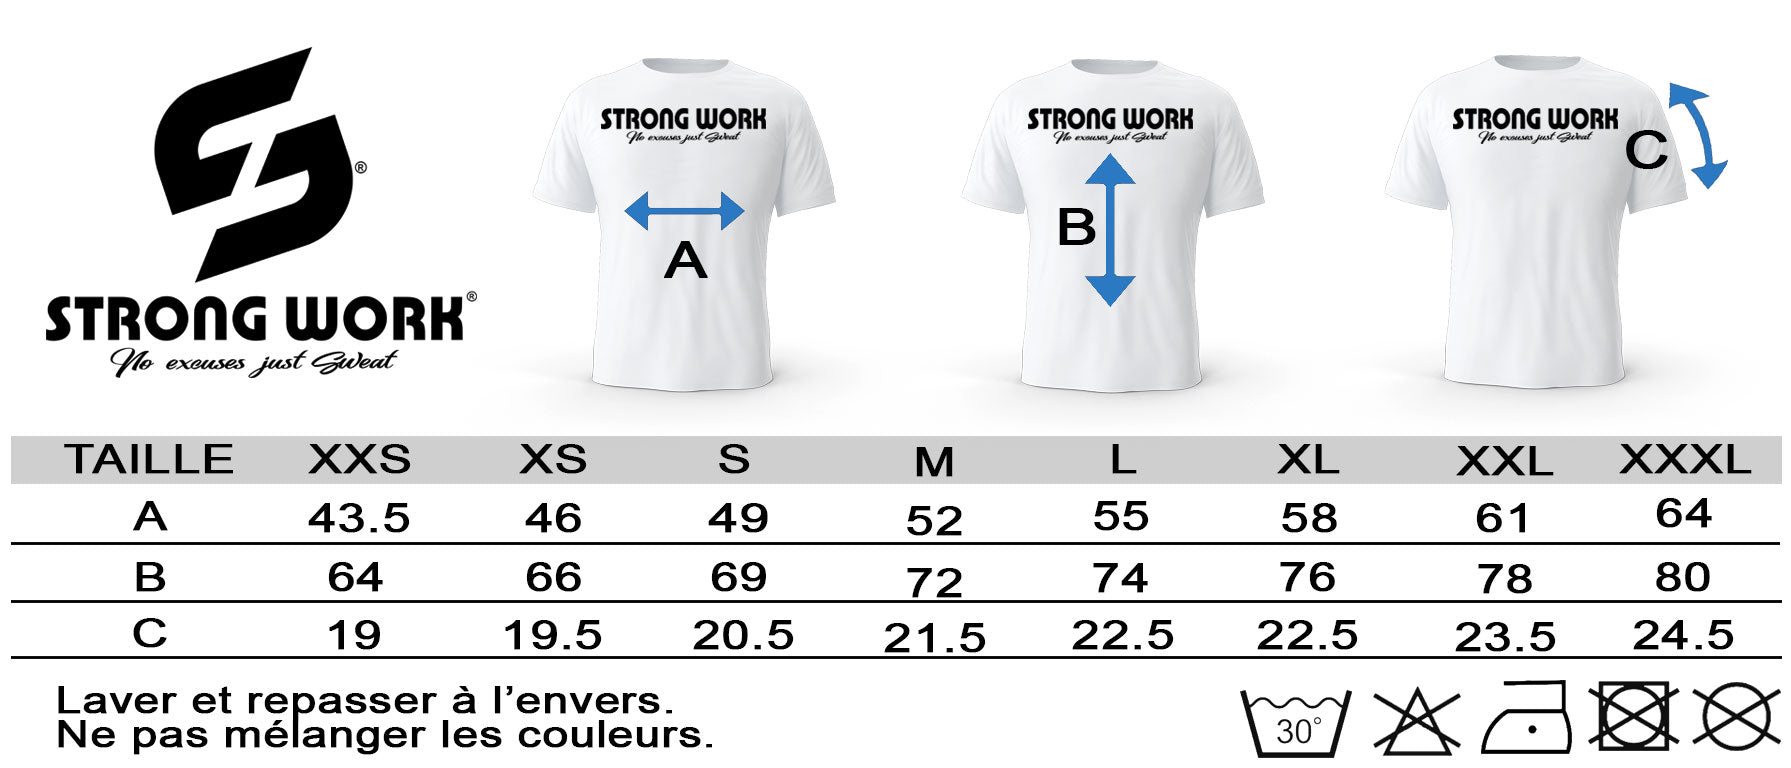 GUIDE DES TAILLES T-SHIRTS STRONG WORK ORIGINALS